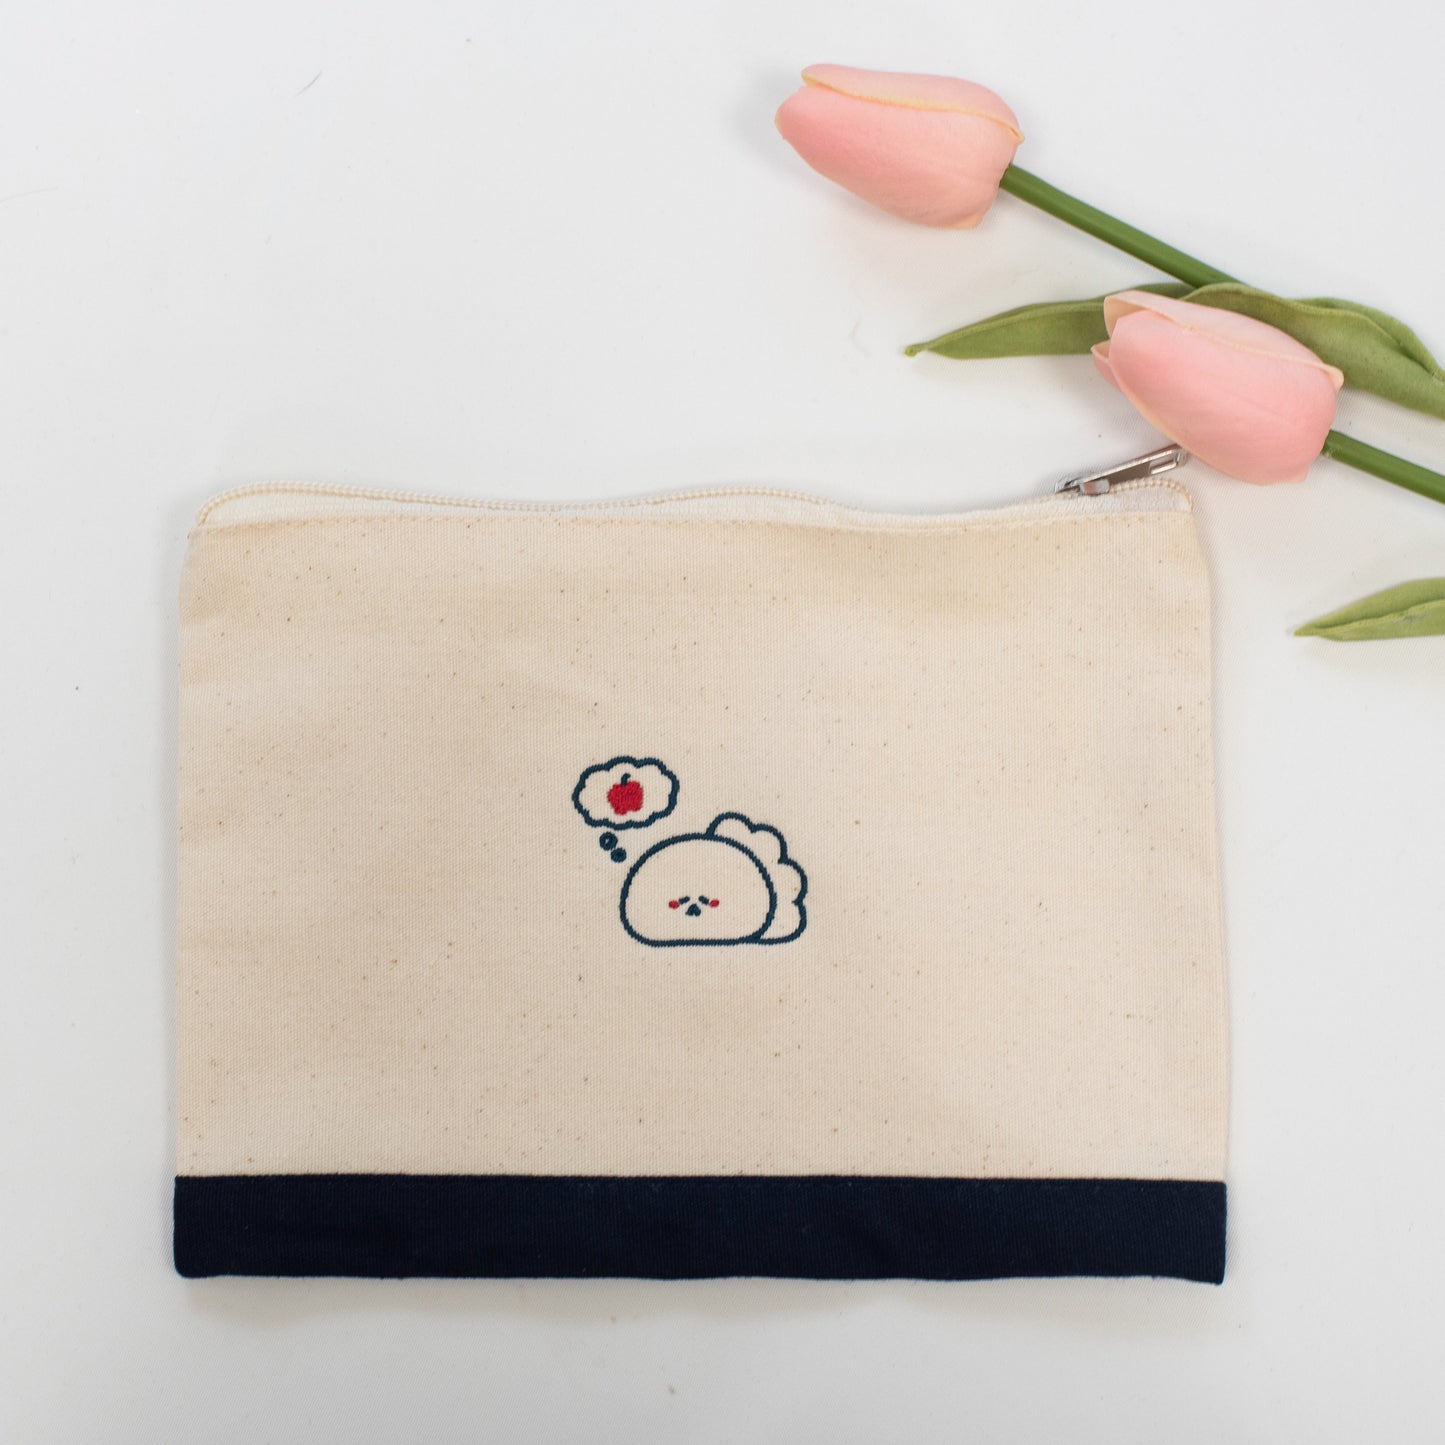 [Troublesome Saurus] Embroidery pouch